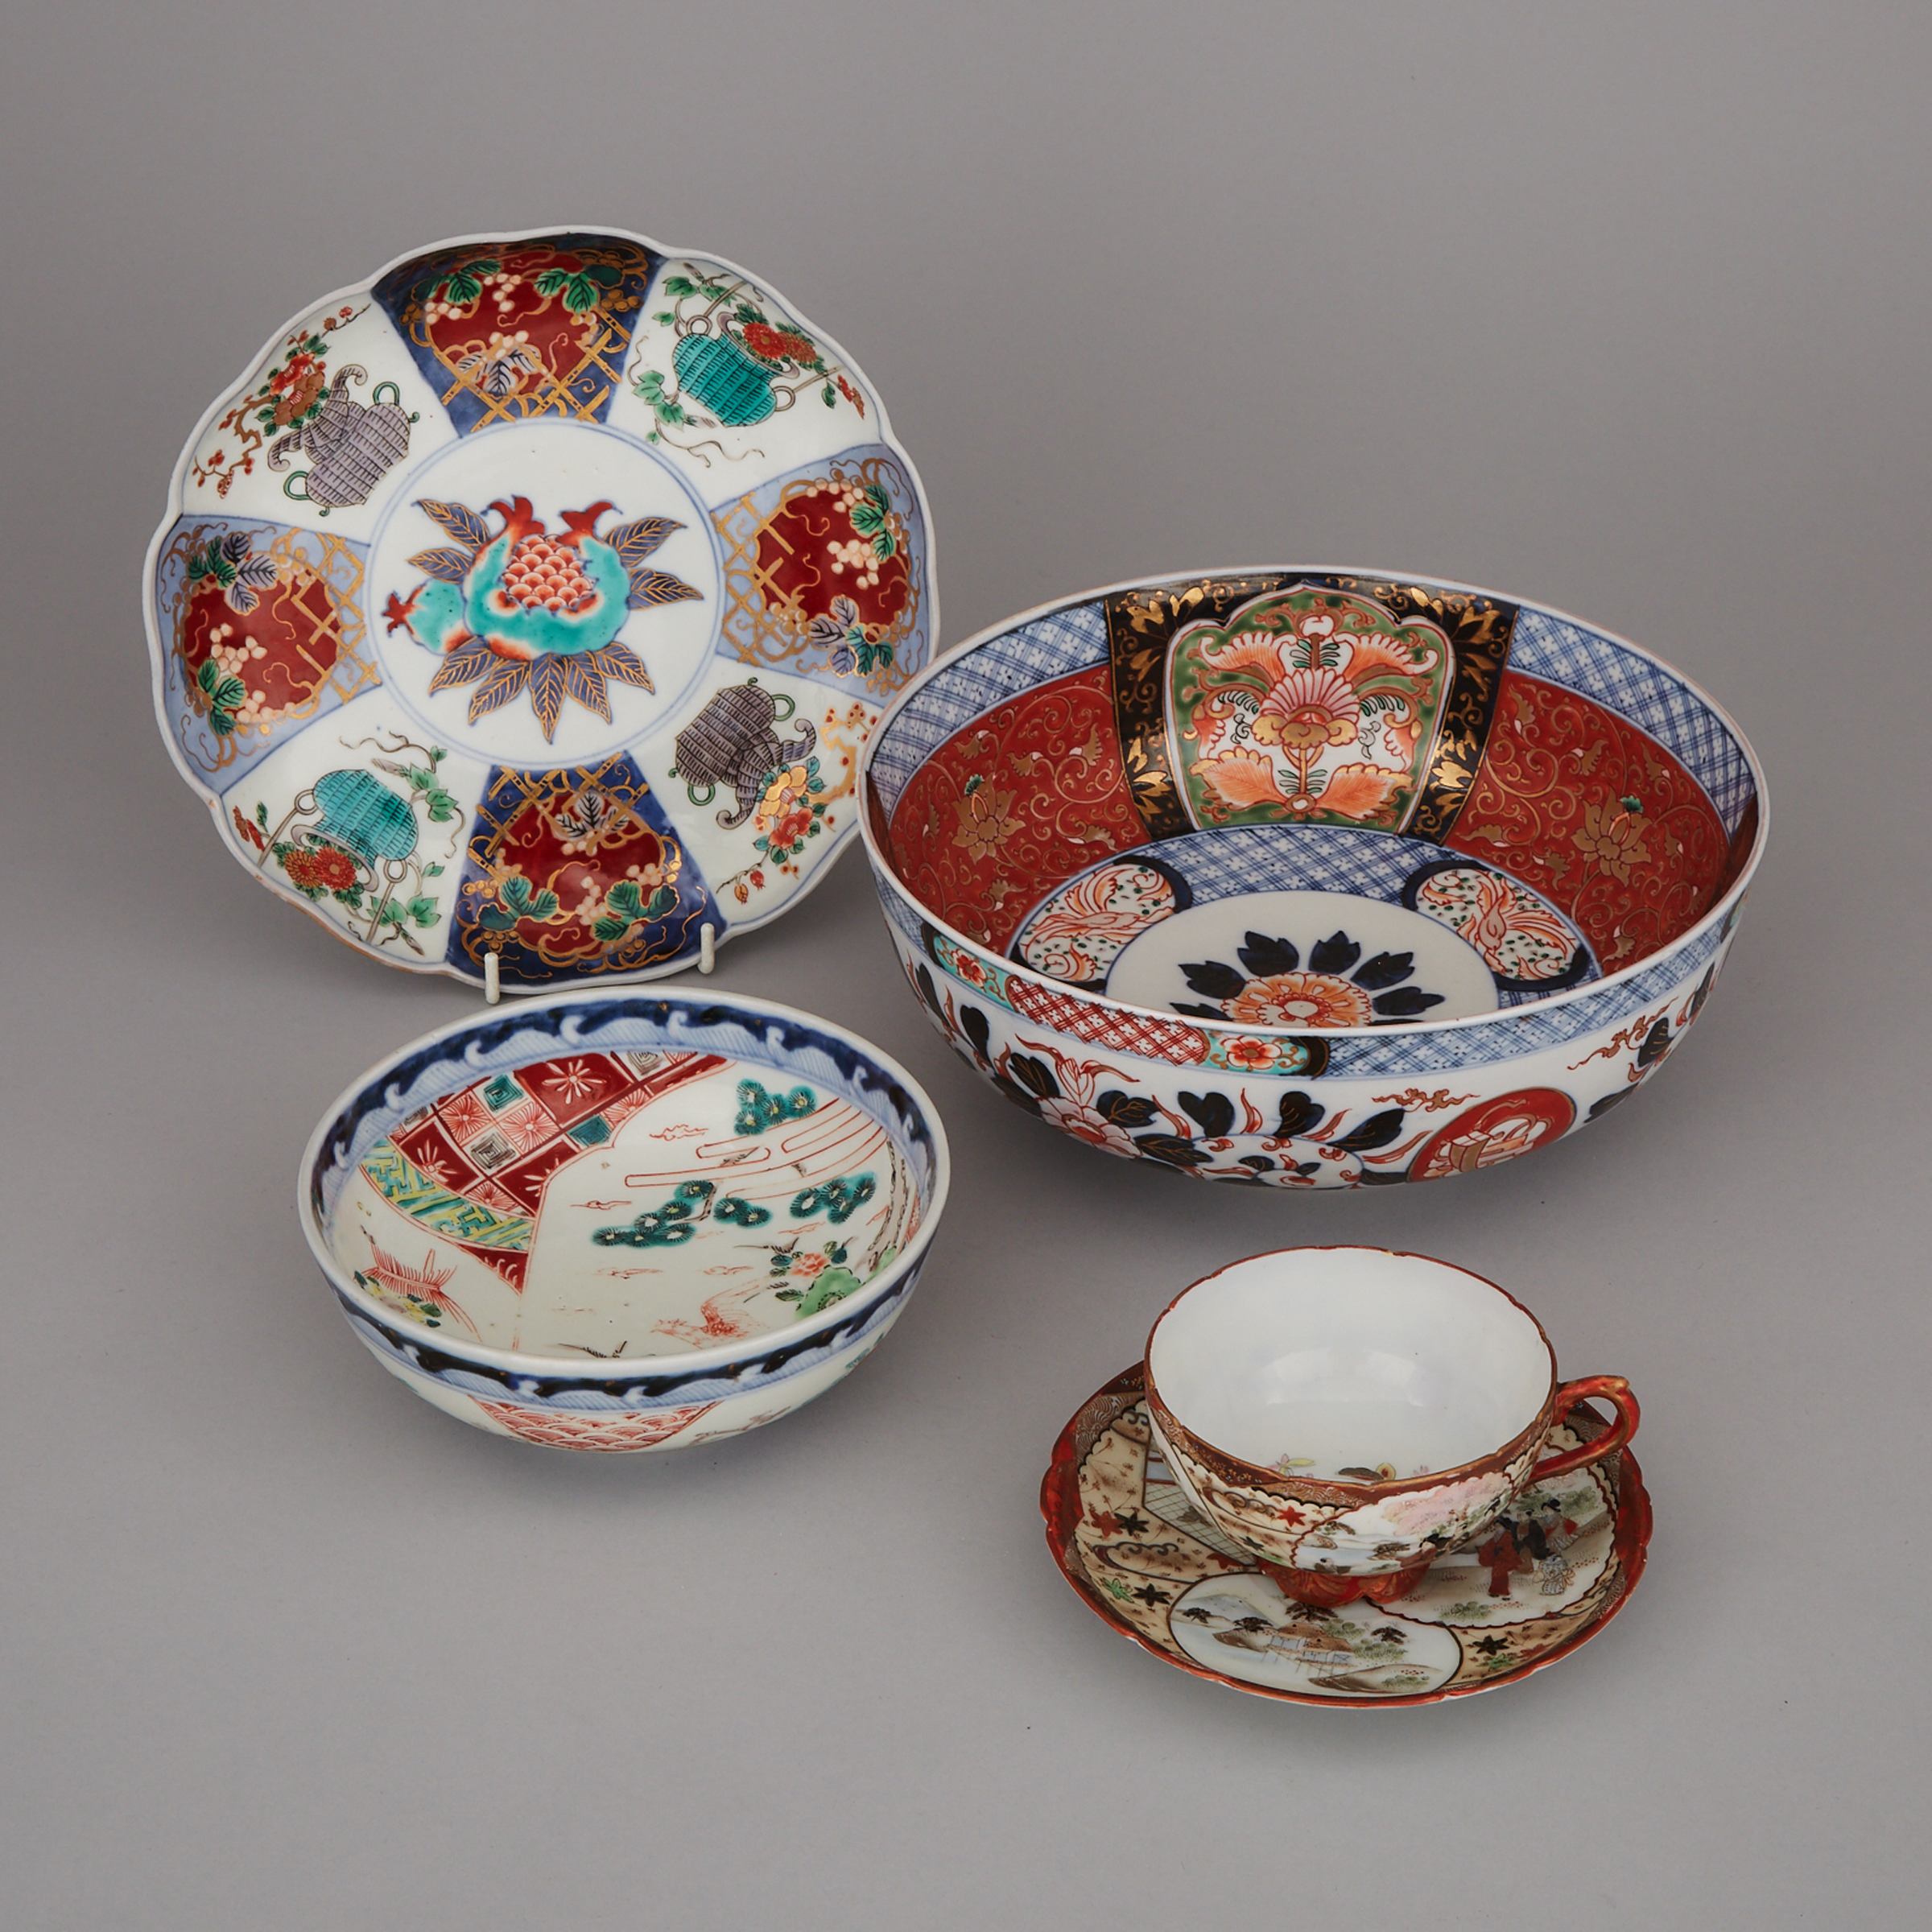 A Group of Five Japanese Porcelain Wares